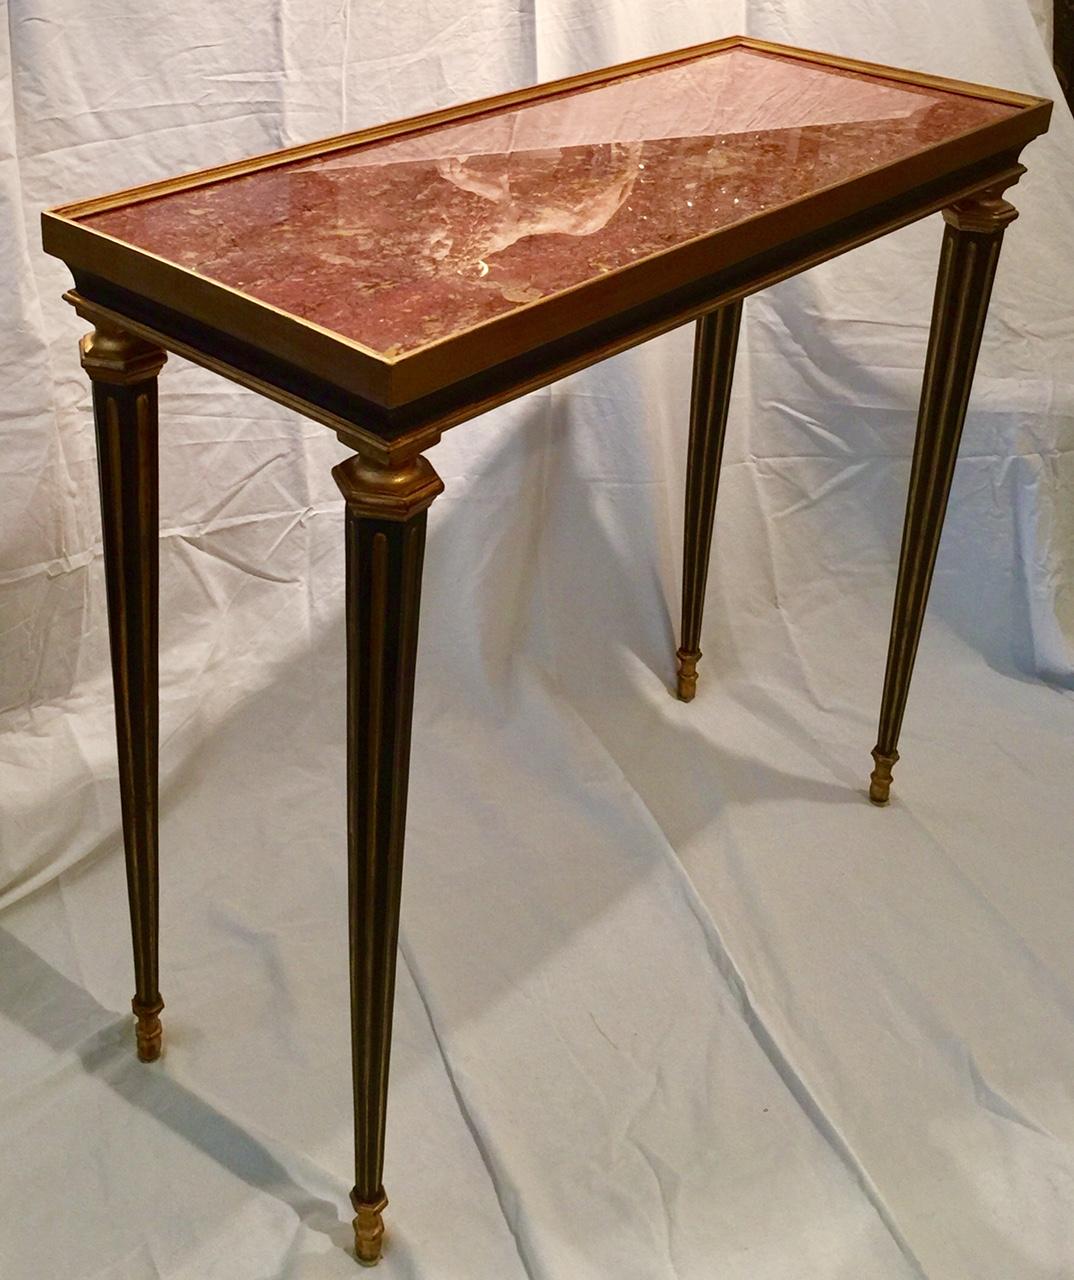 Ebonized French Neoclassical Louis XVI Style Console Table, Weisweiller Model, Marble Top